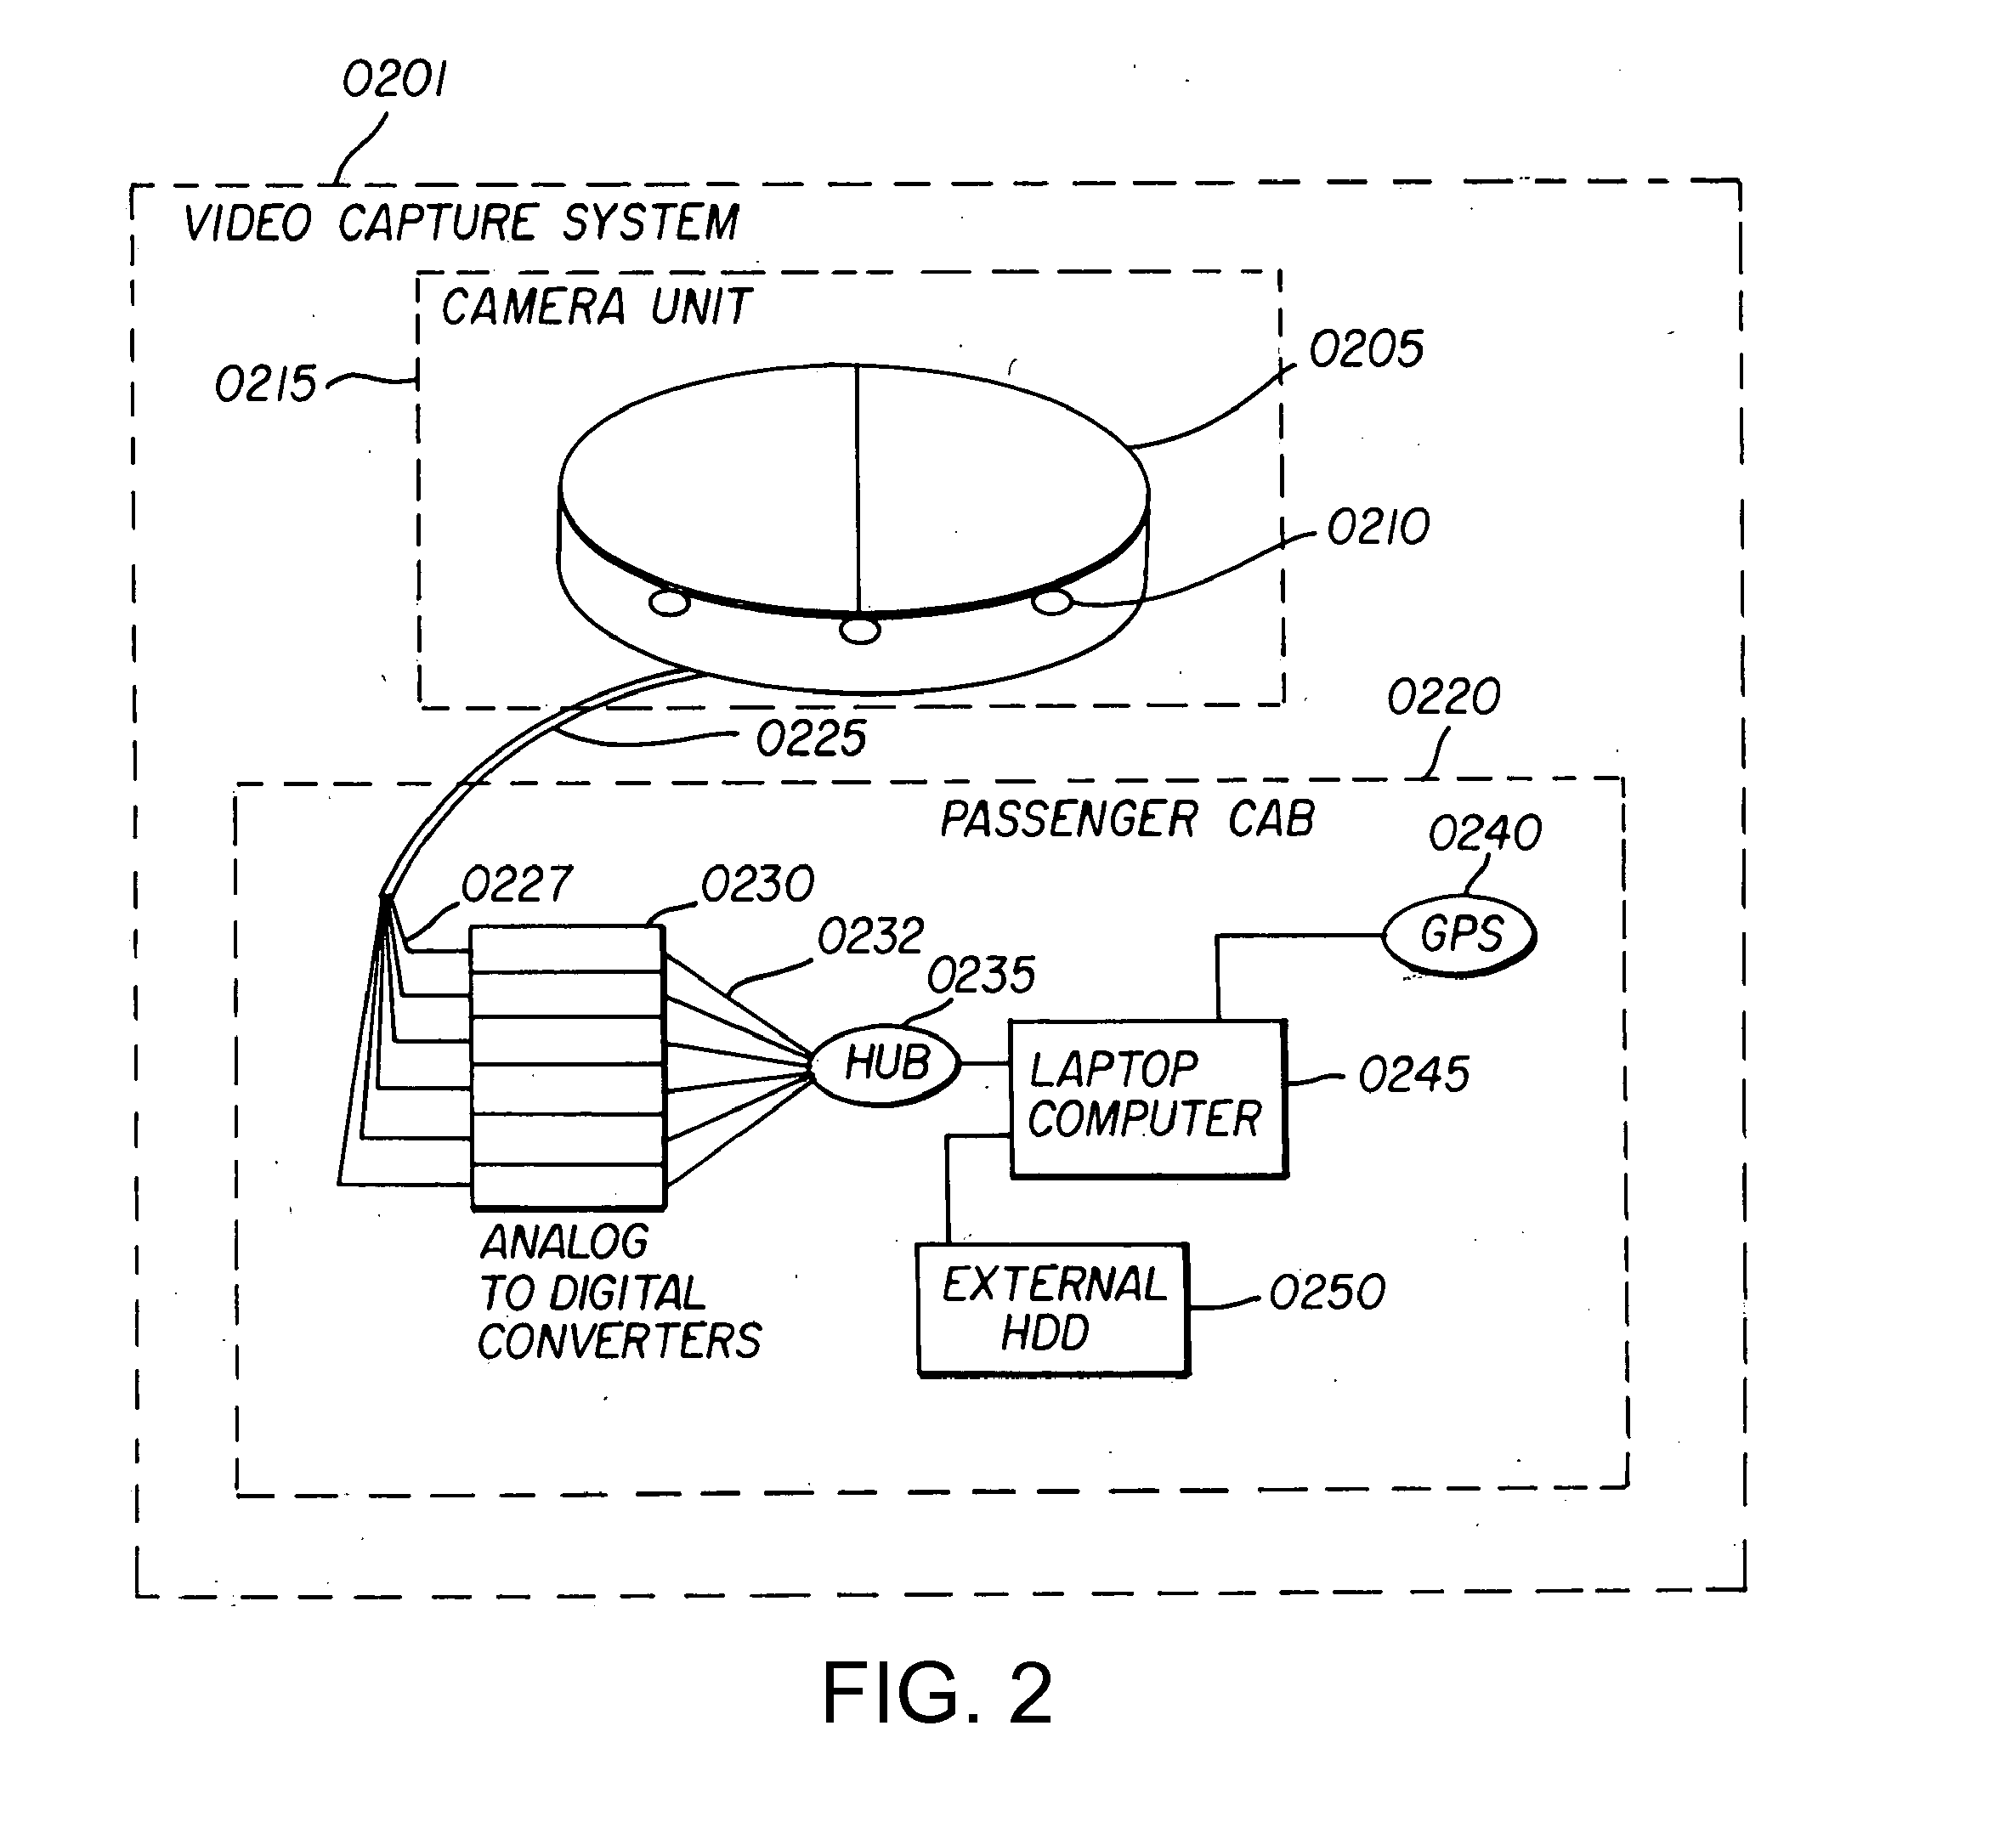 Method and Apparatus of Providing Street View Data of a Real Estate Property